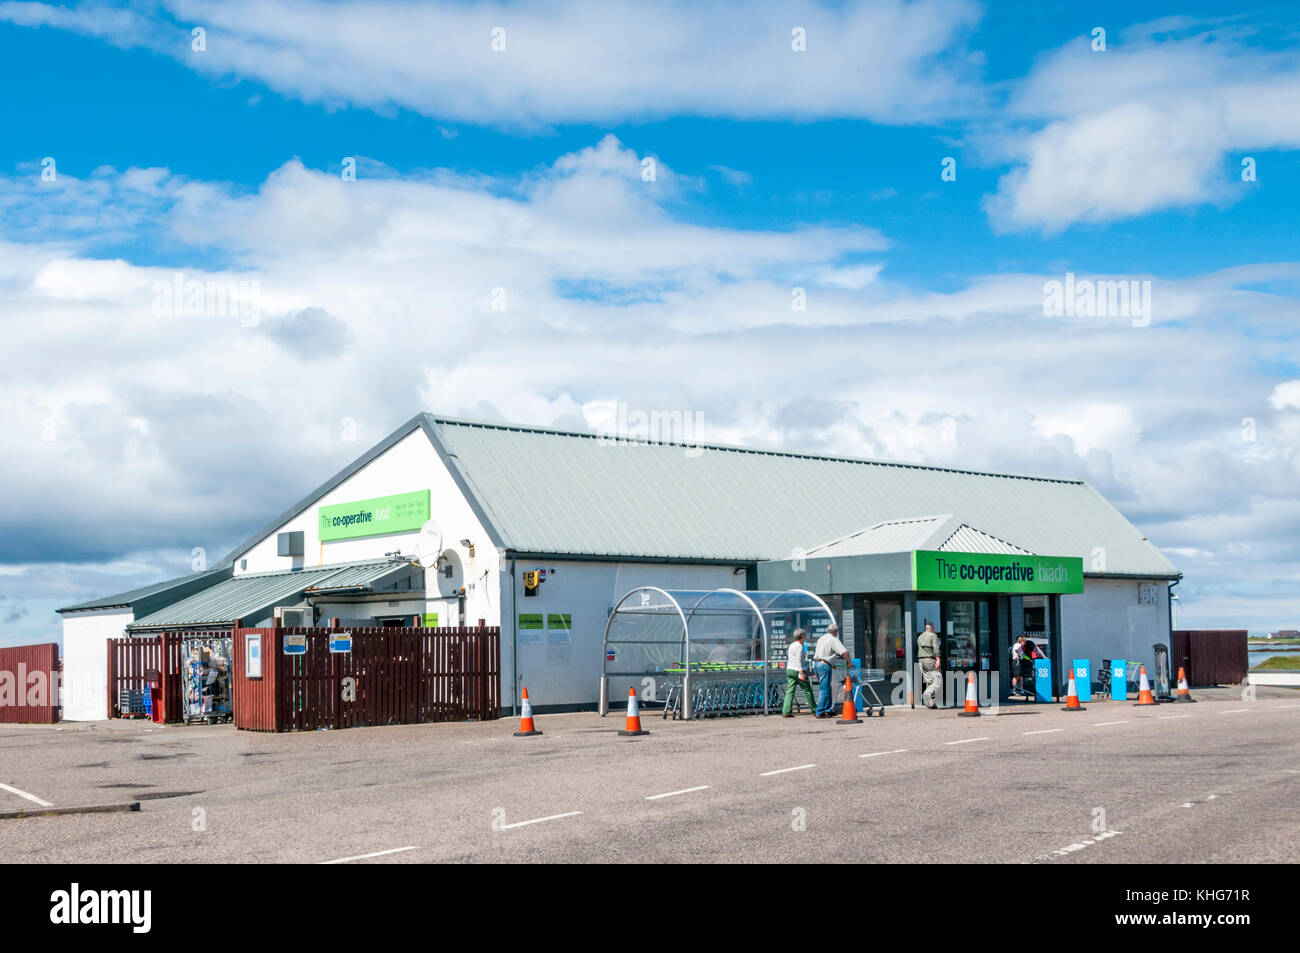 Co-op shop at Creagorry on Benbecula in the Outer Hebrides. Stock Photo